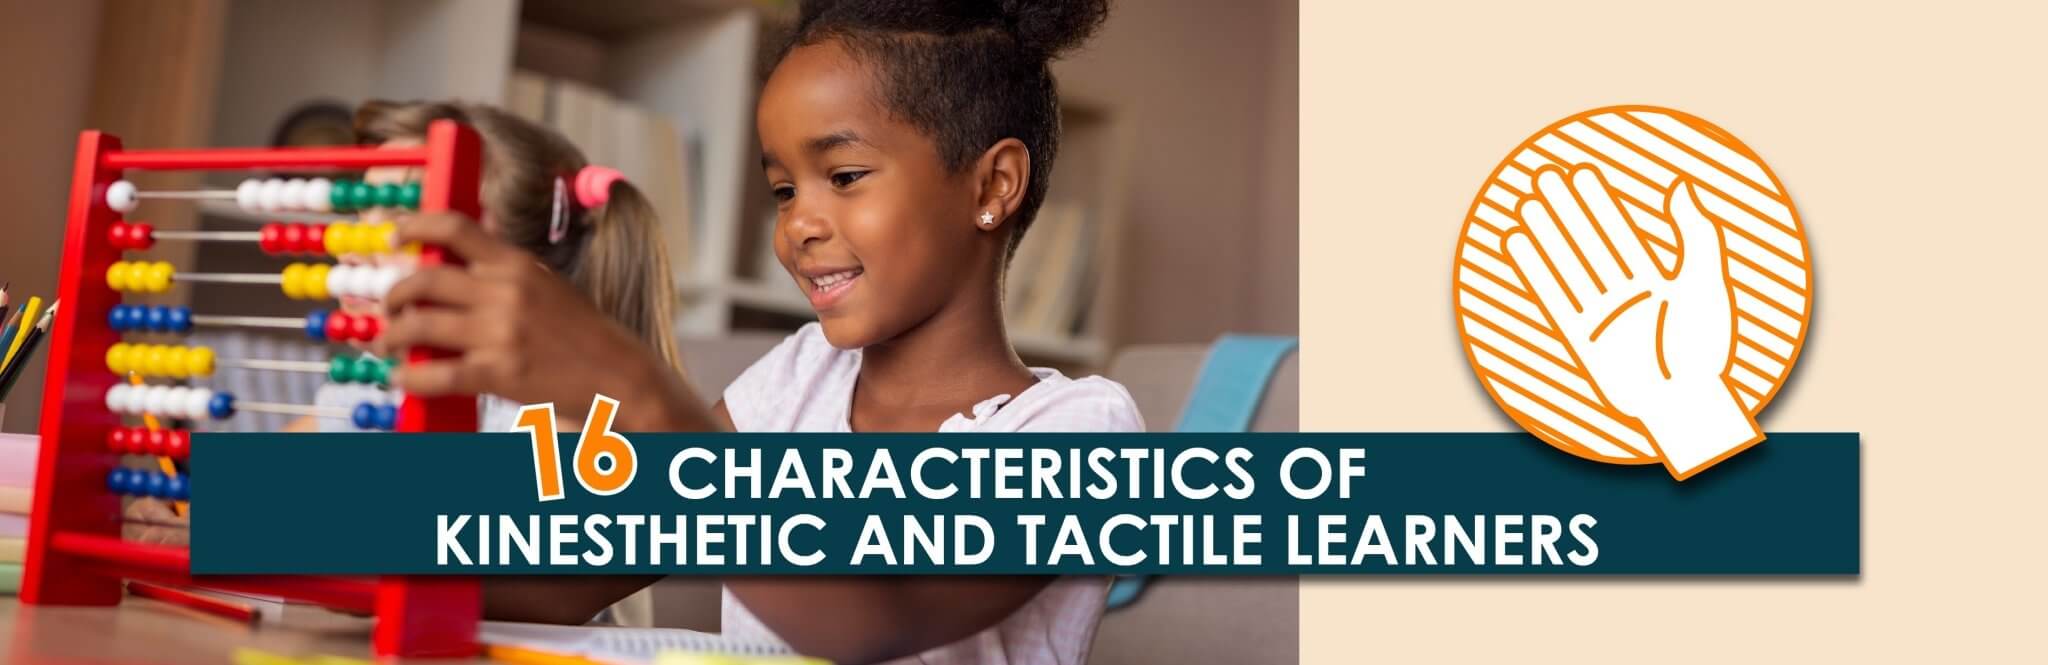 16 Characteristics of Kinesthetic and Tactile Learners